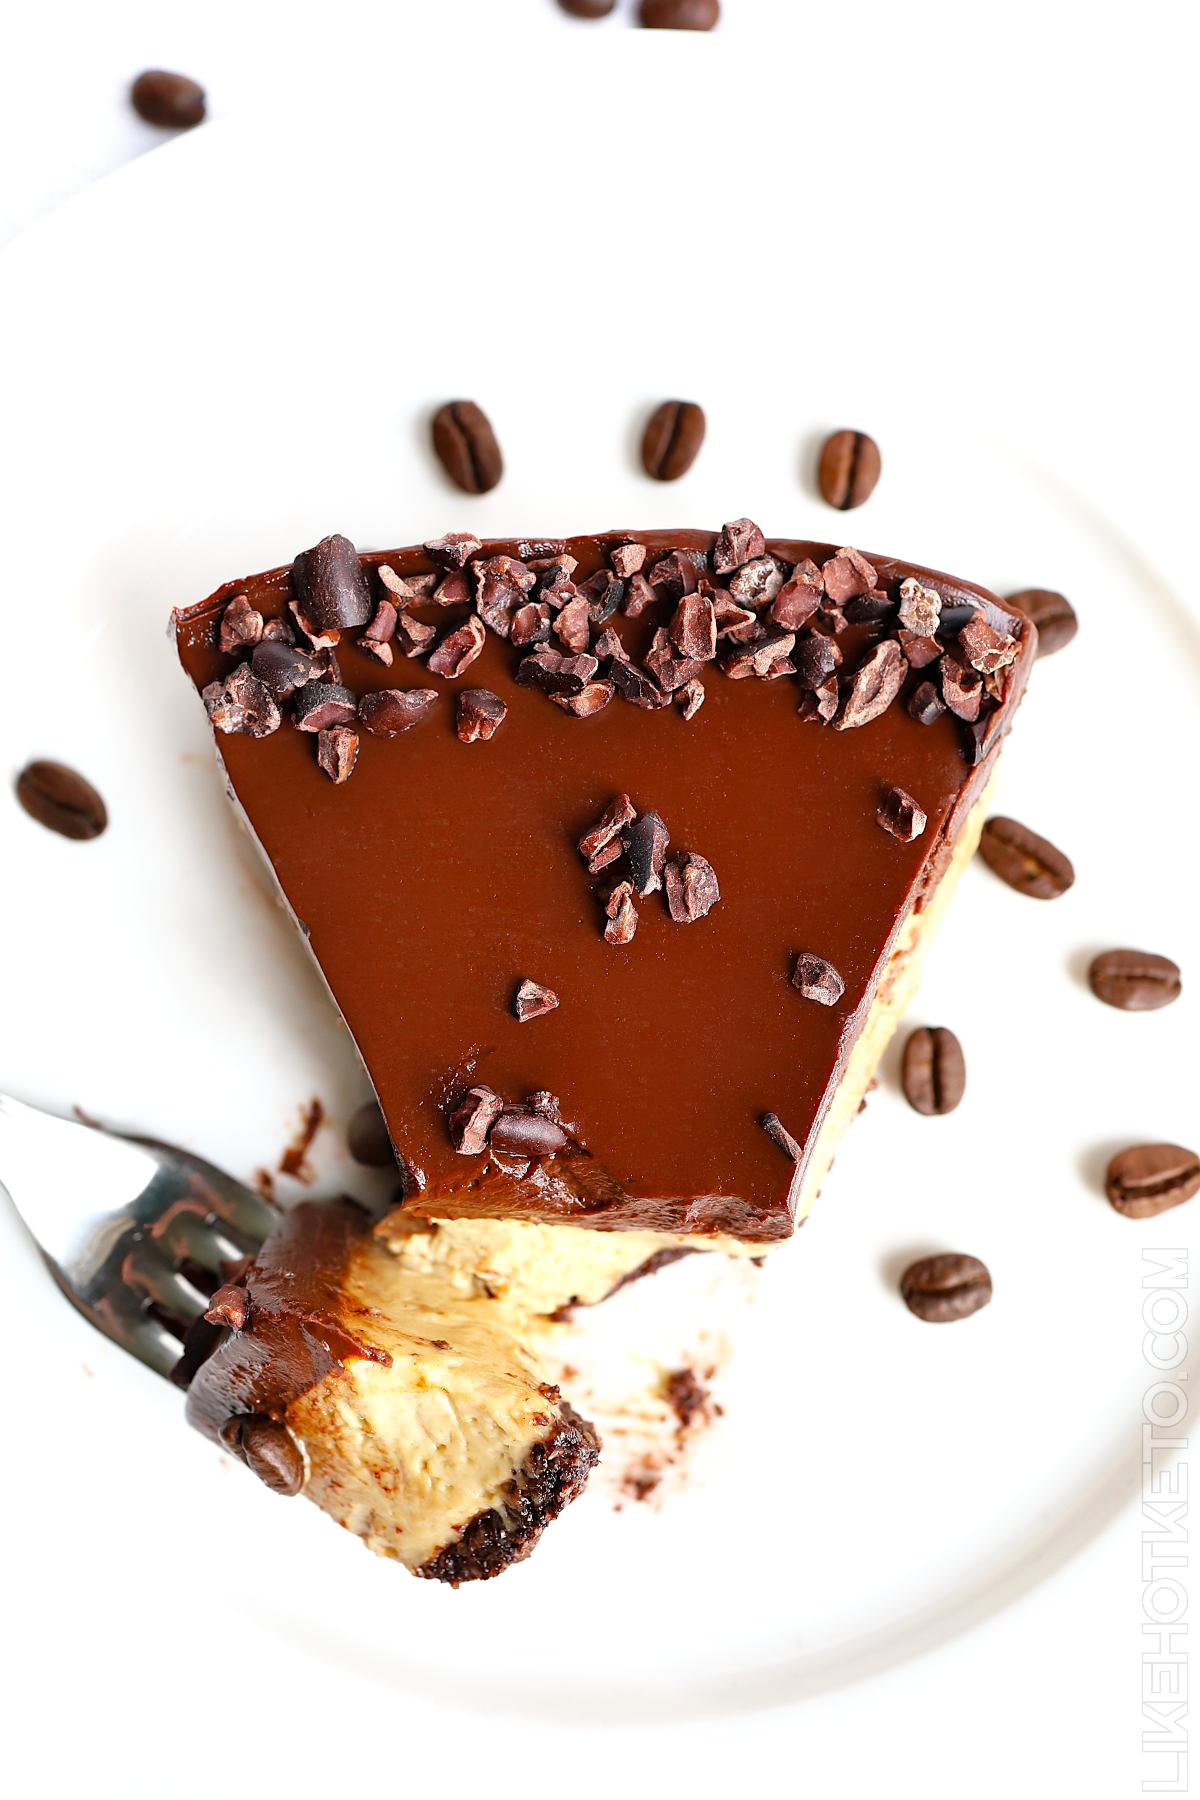 Top view of a slice of keto mocha cheesecake with a creamy ganache topping, with a bite taken of by a fork, resting on the side.